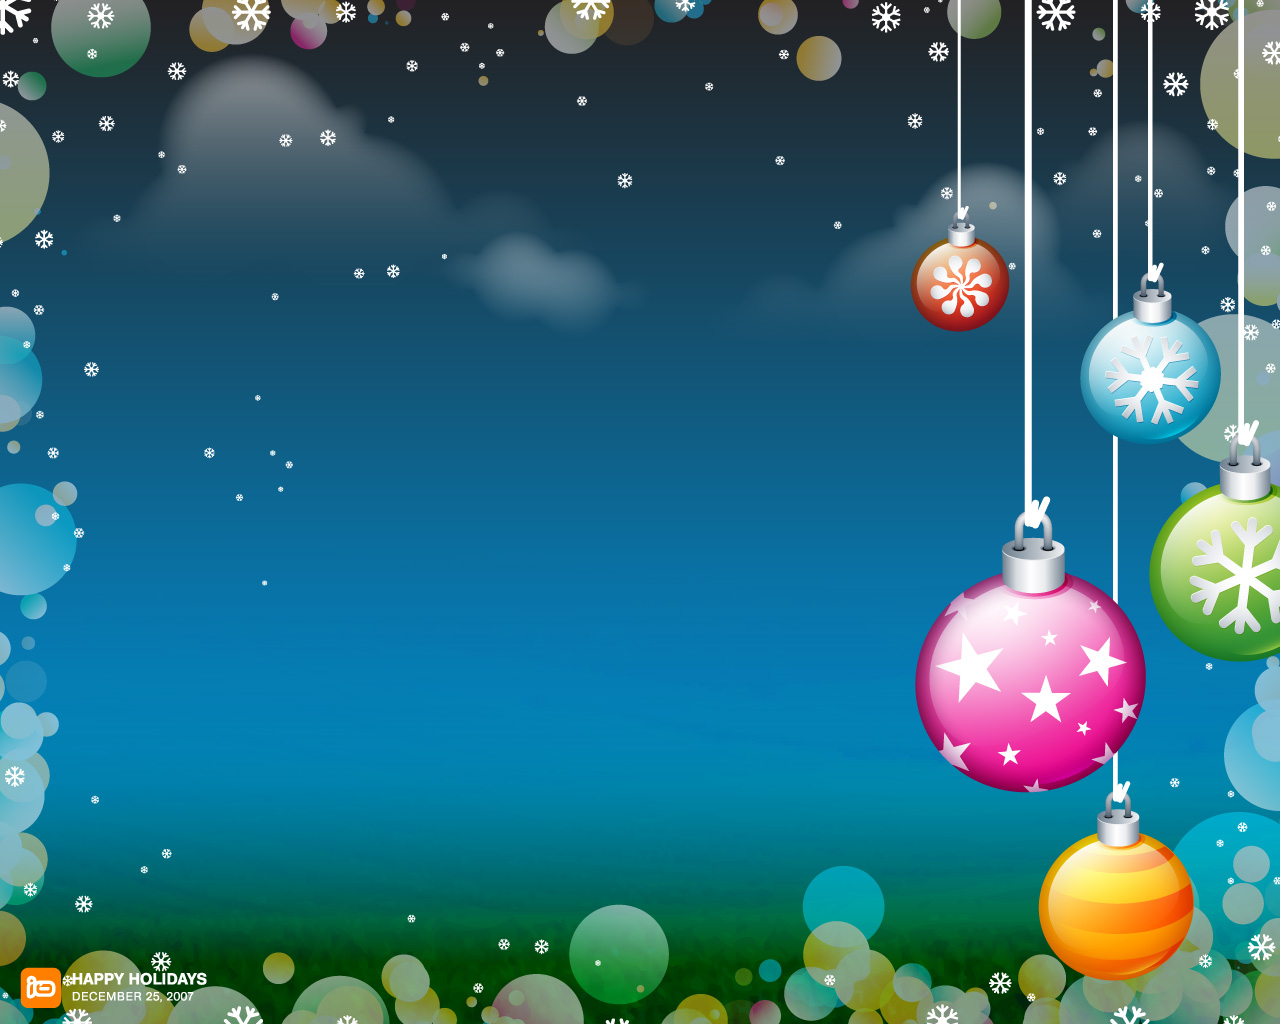 Hand Picked Christmas HD Wallpaper Desktop Background Collection